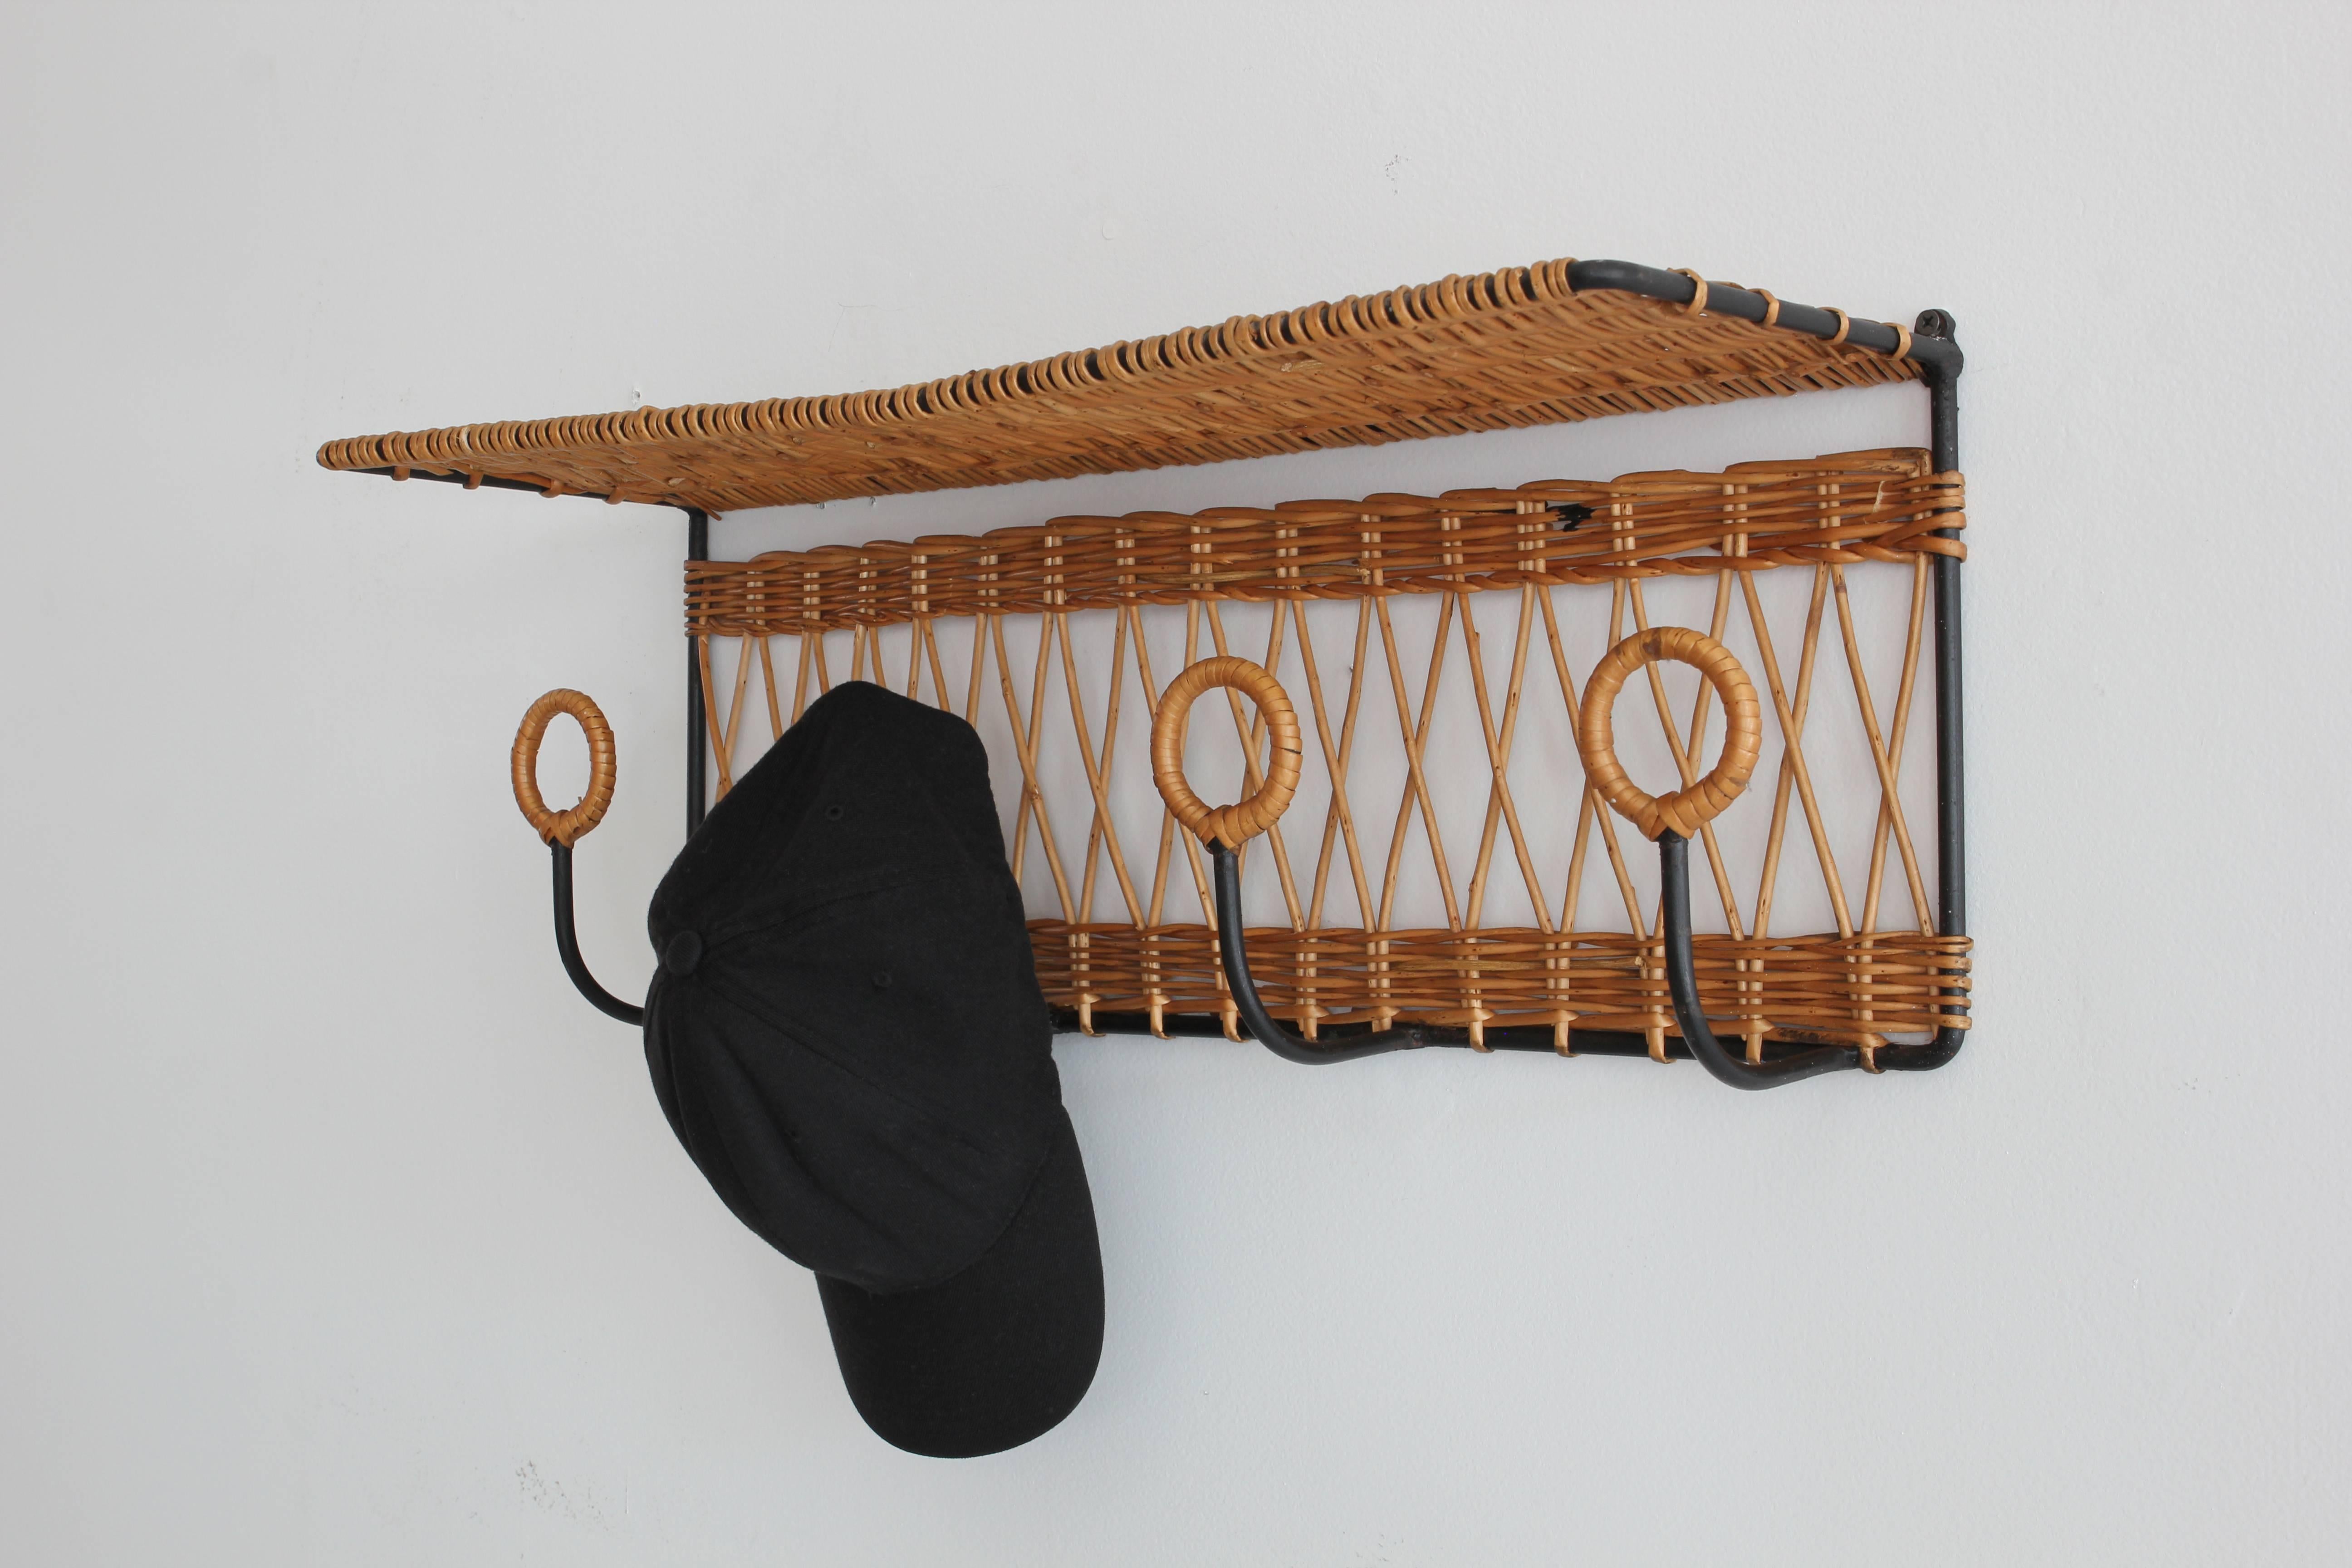 Beautiful iron shelf and set of four hooks for coats, hats, or bags in classic Adnet silhouette wrapped in wicker.